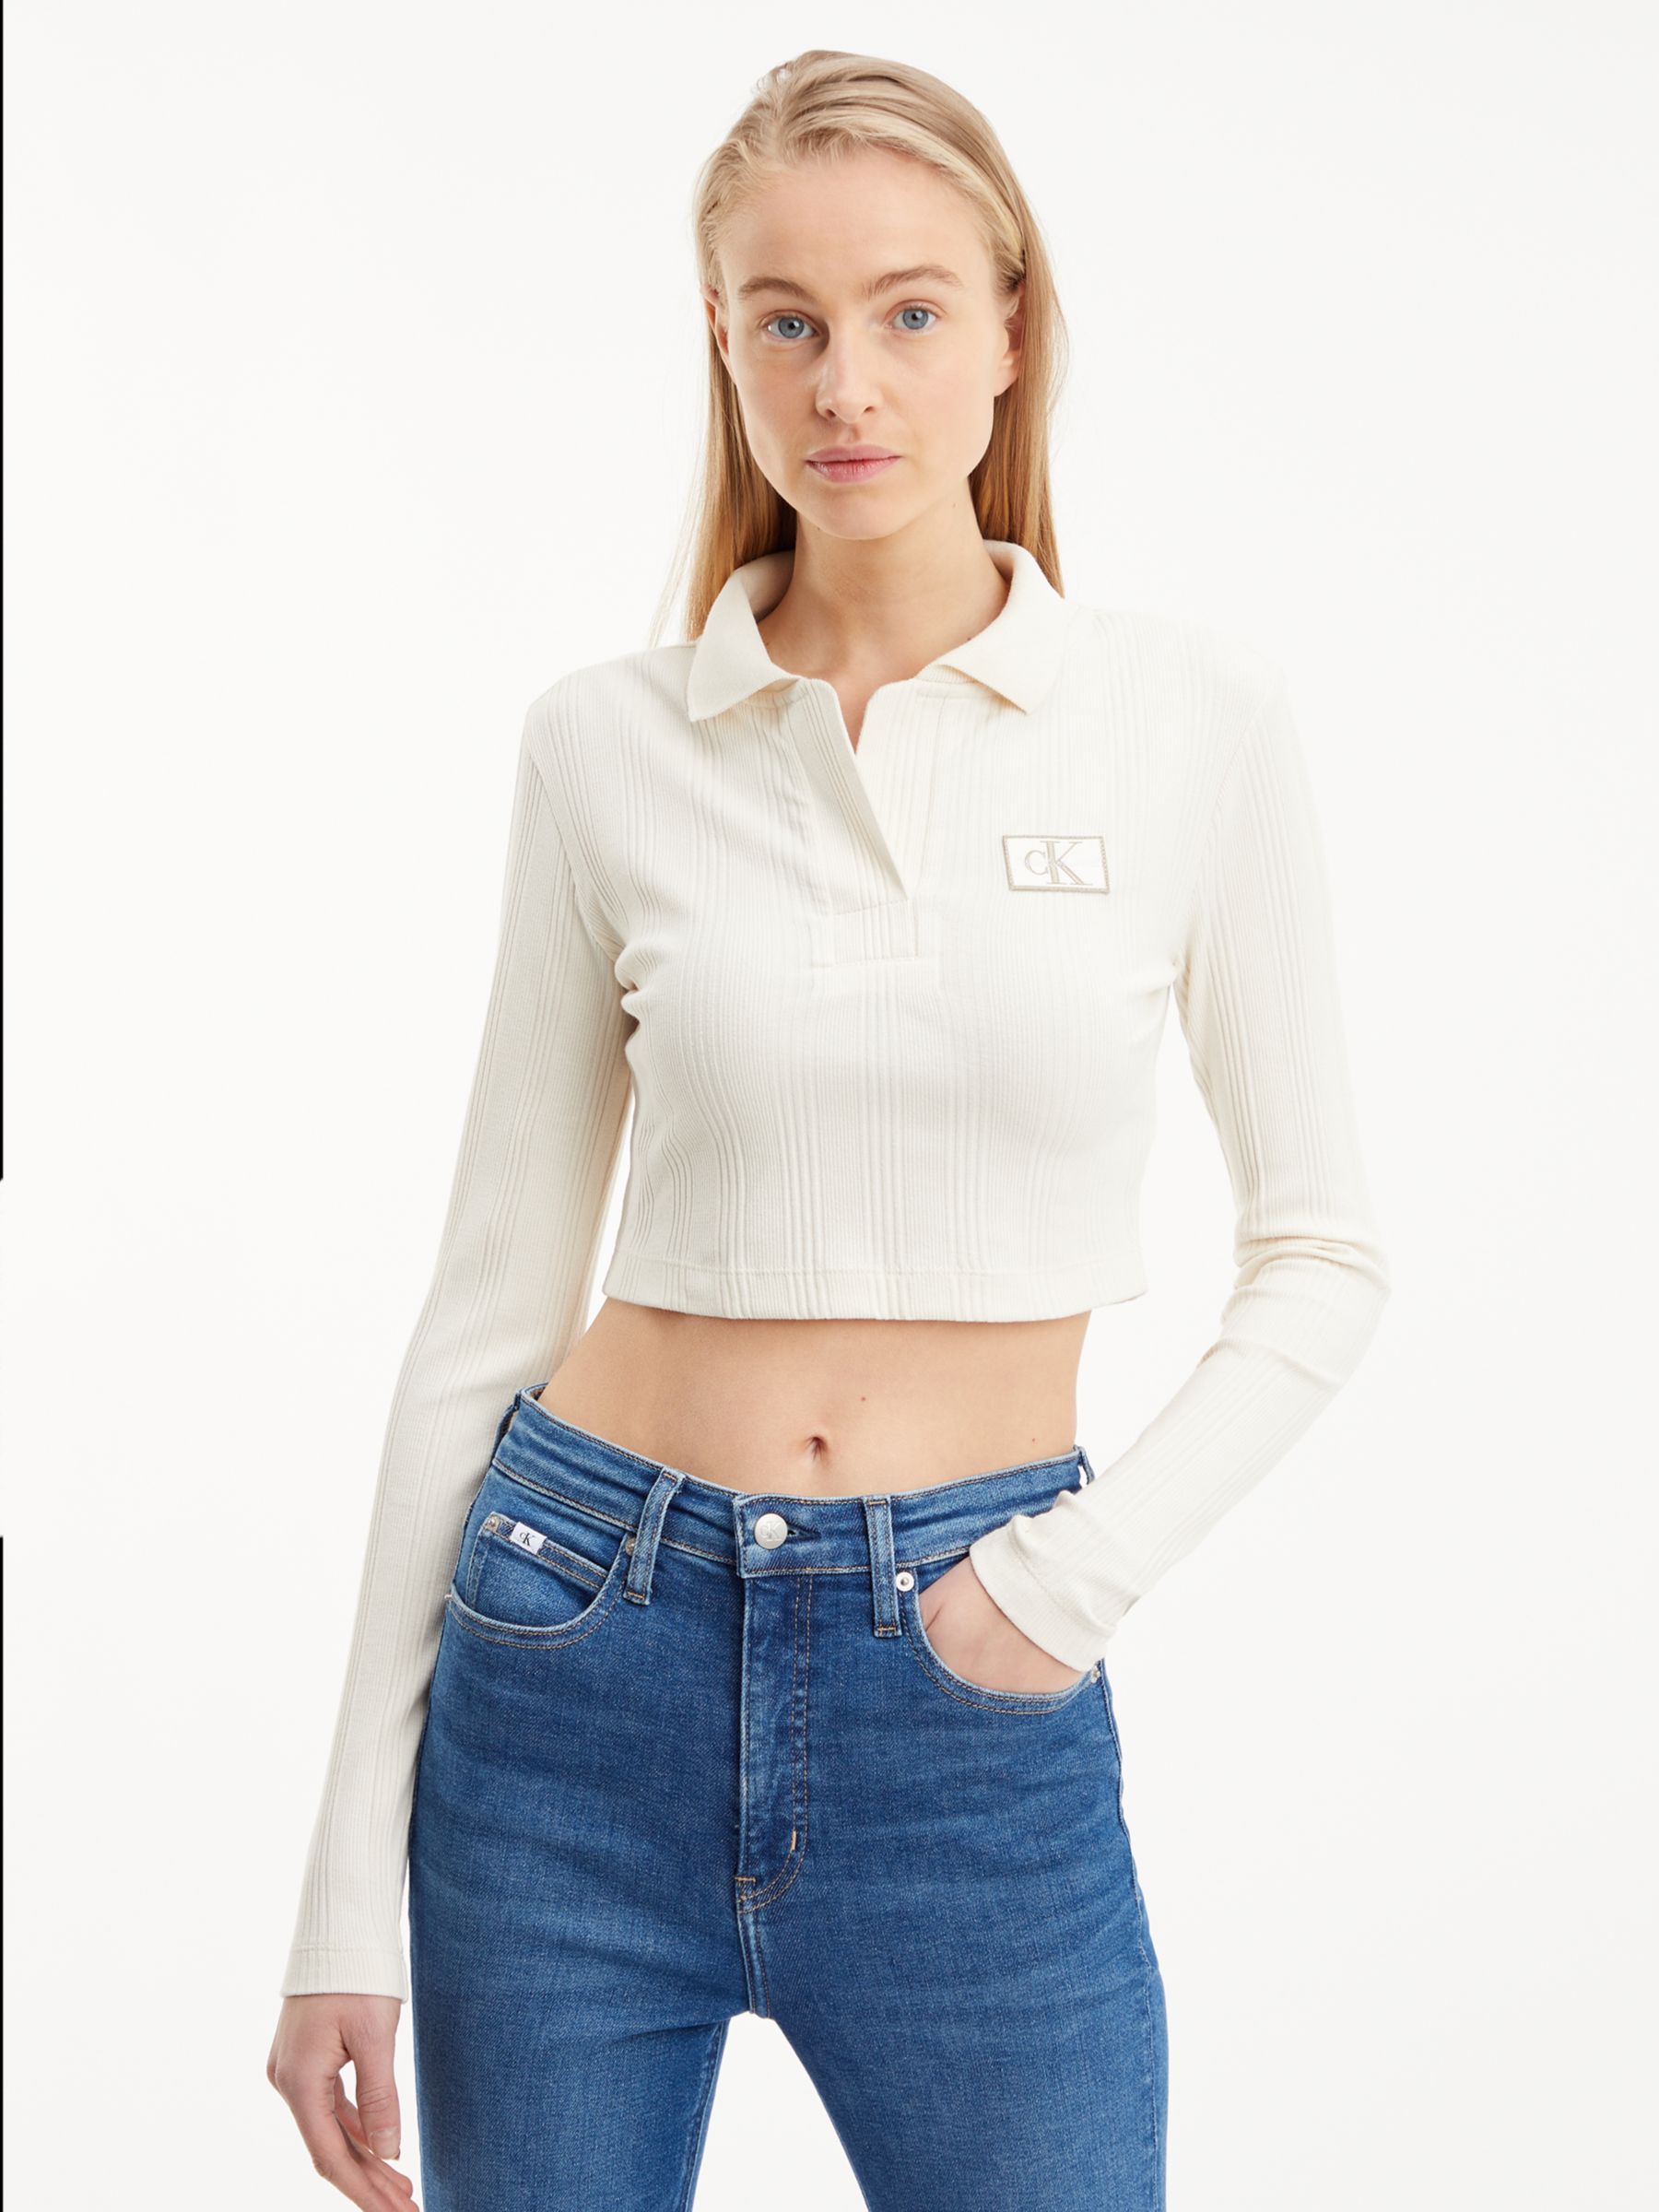 Calvin Klein Cropped Long Sleeve Polo Top, Ivory at John Lewis & Partners